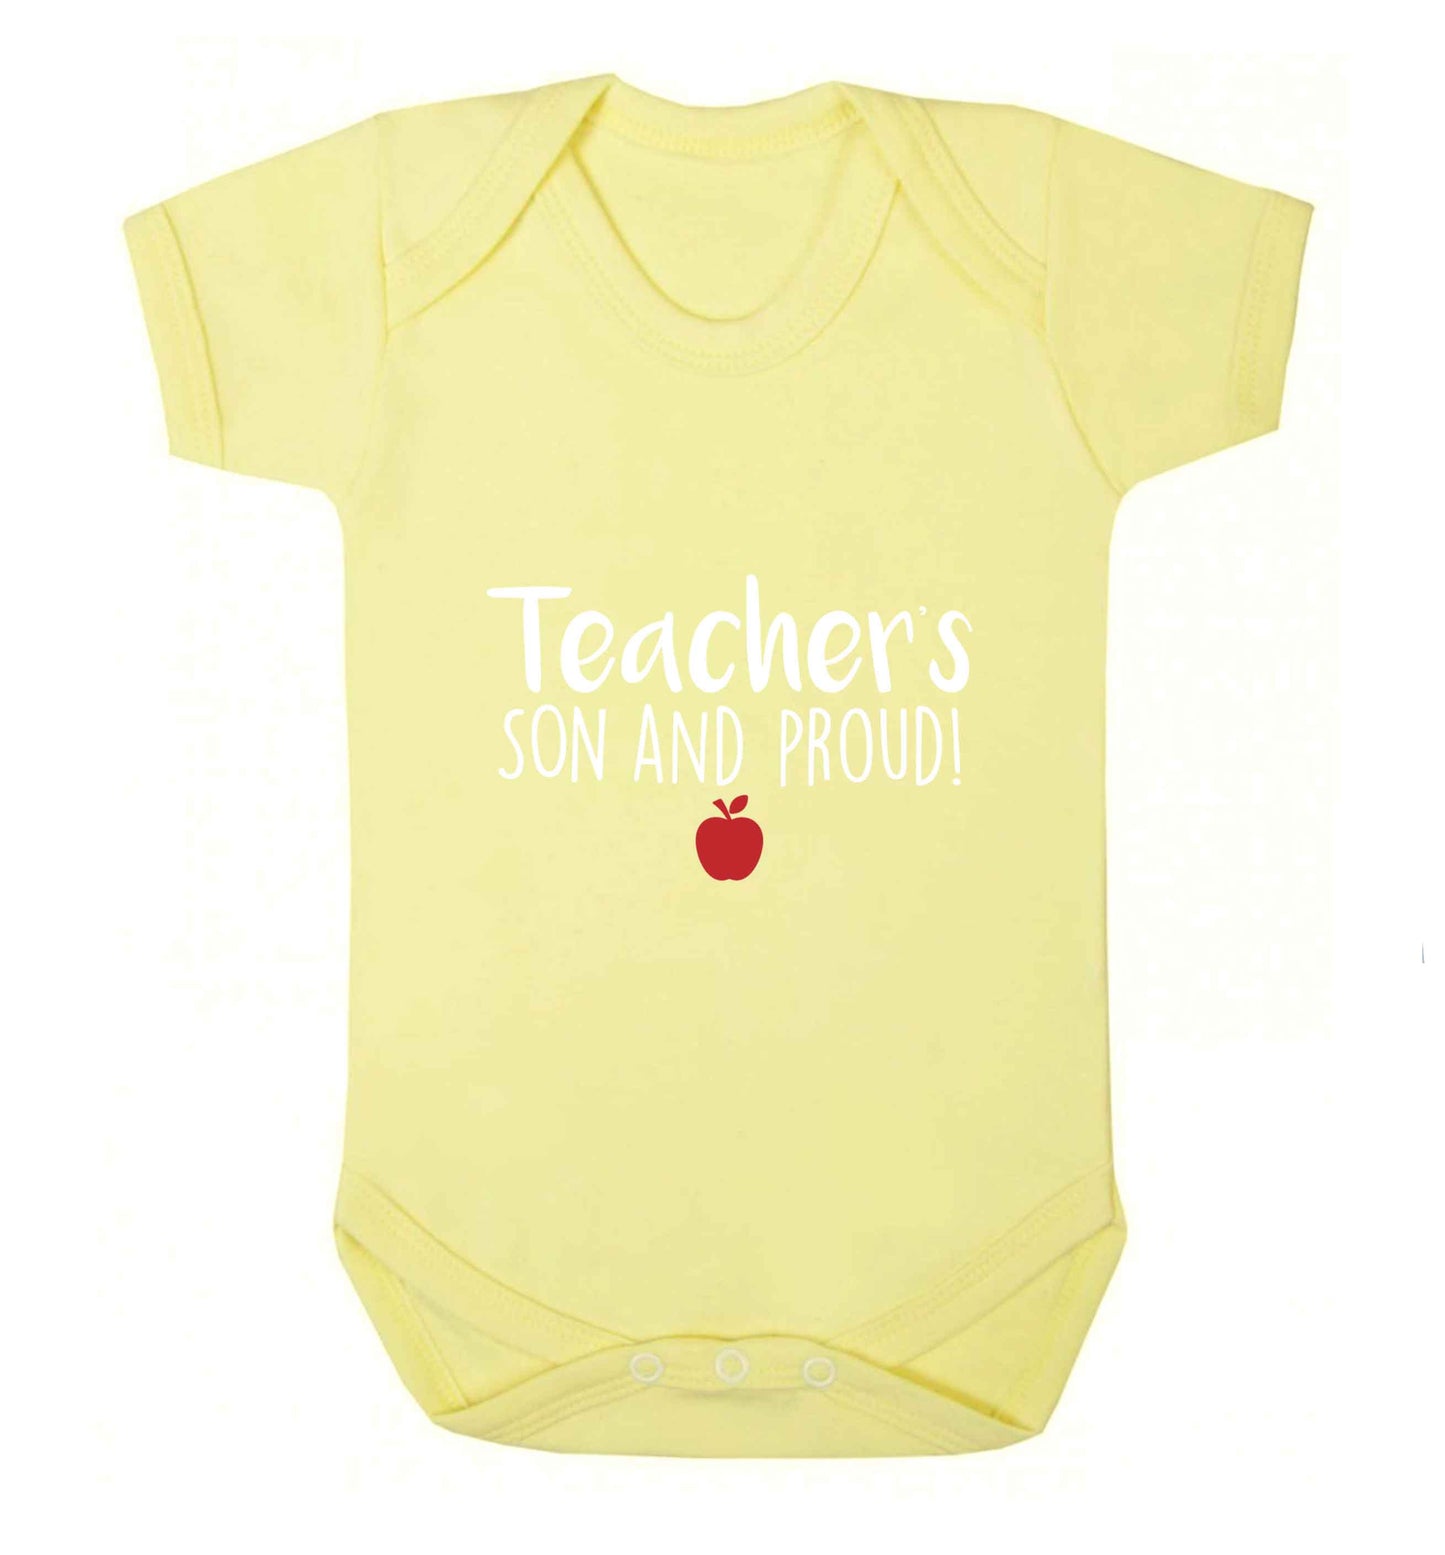 Teachers son and proud baby vest pale yellow 18-24 months